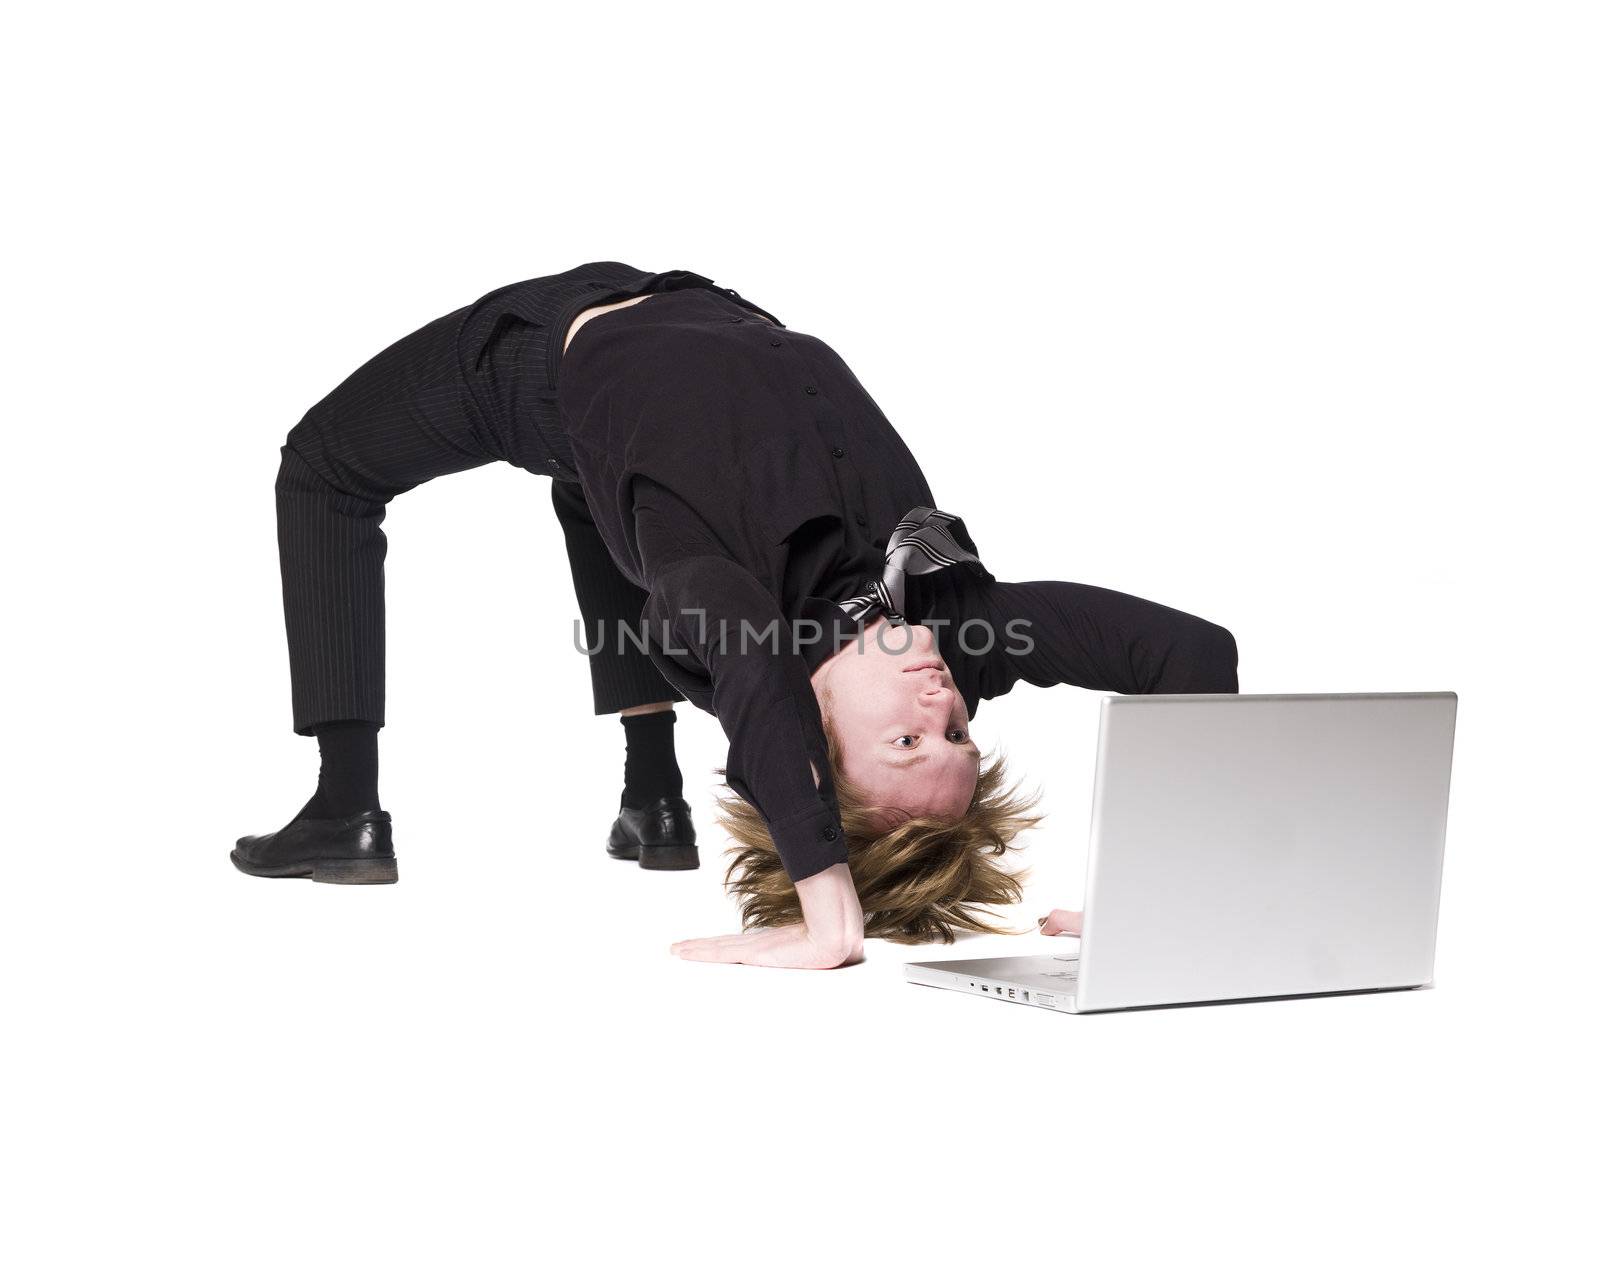 Acrobatic man in front of a computer by gemenacom